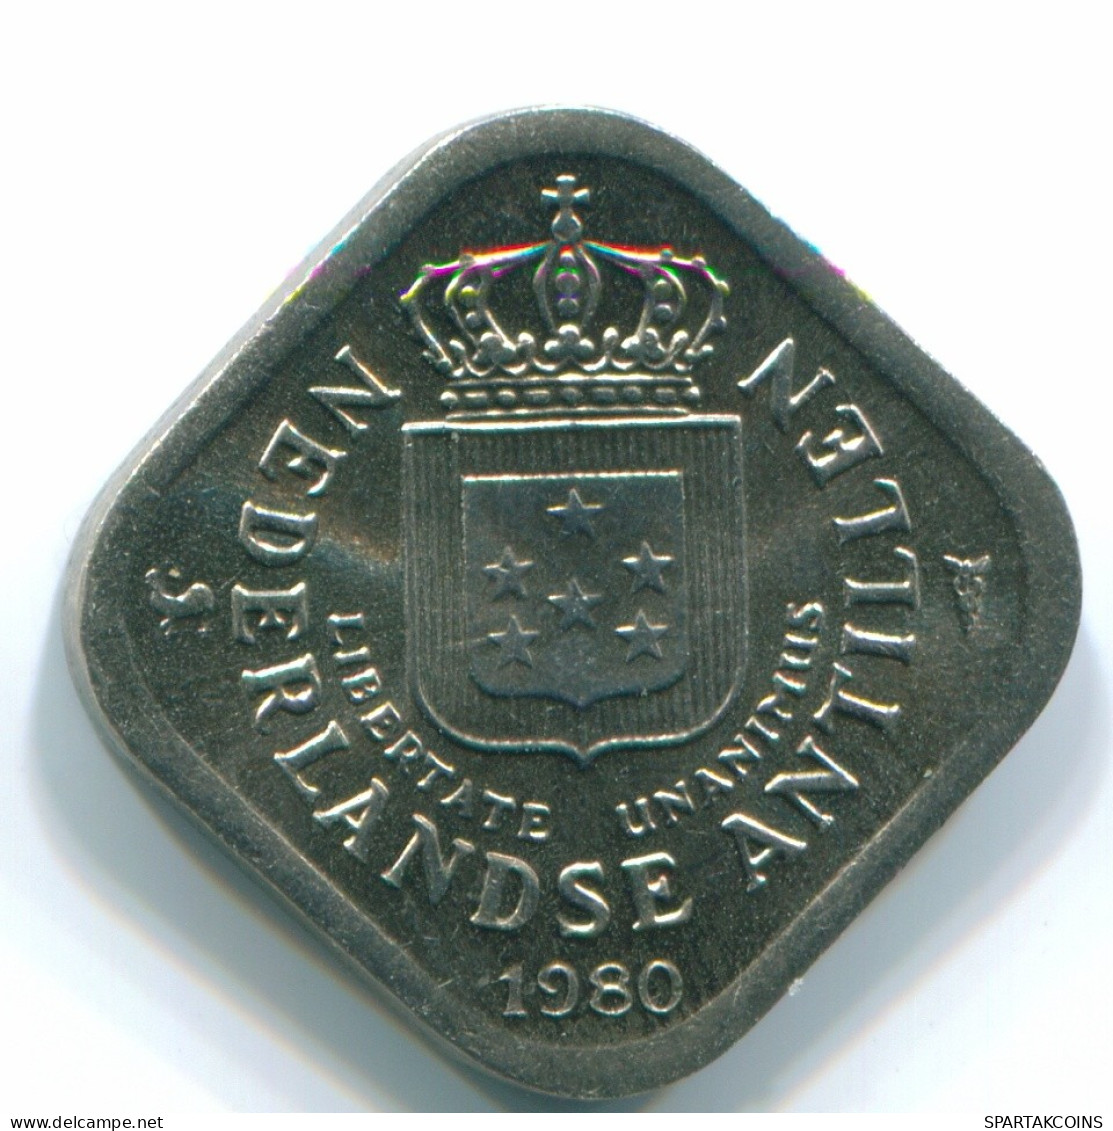 5 CENTS 1980 NETHERLANDS ANTILLES Nickel Colonial Coin #S12316.U.A - Antille Olandesi